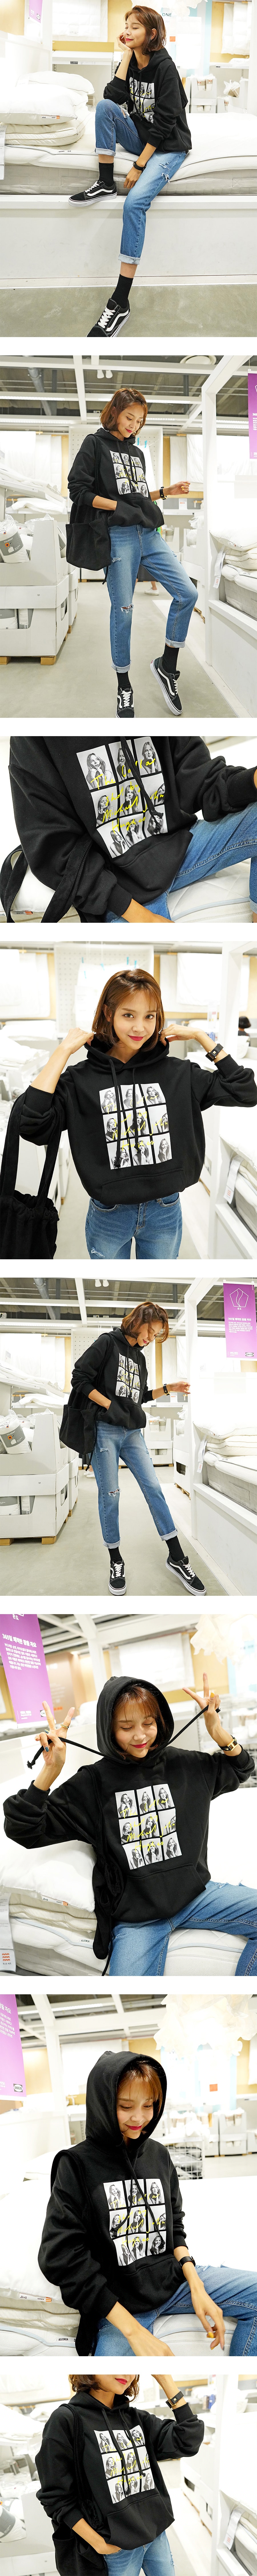 WINGS Oversized Graphic-Print hoodie #Black One Size(Free)